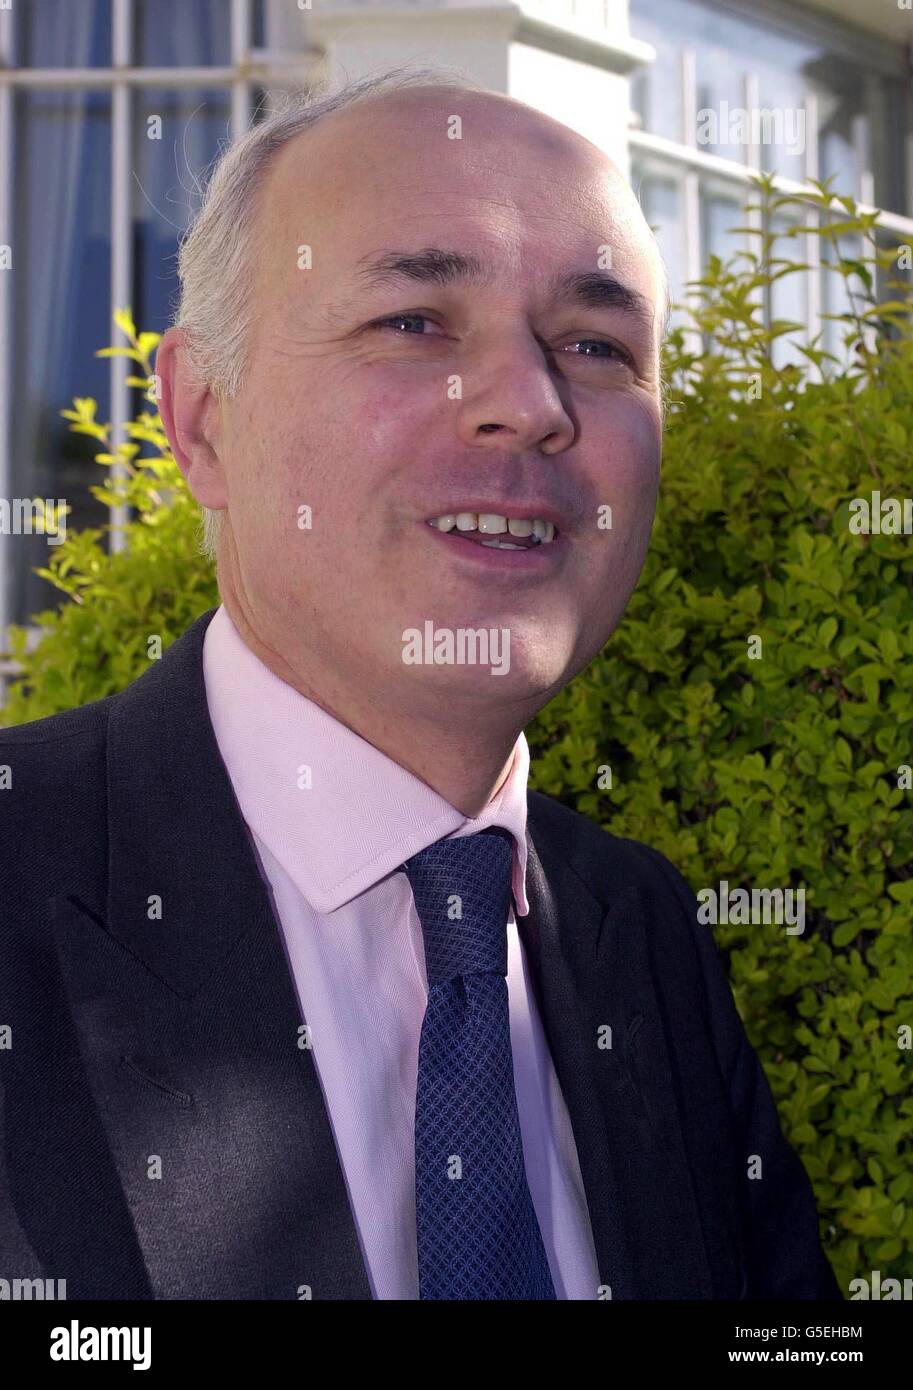 Shadow Defence Secretary Iain Duncan Smith outside his London home. Senior Tory Iain Duncan Smith will launch his bid to replace William Hague as leader of the Conservative Party. The campaign, which give rank and file members the prospect. * ... of a Right-leaning alternative to shadow chancellor Michael Portillo will get under way at a press conference in London. Mr Duncan Smith, the shadow defence secretary, confirmed yesterday afternoon that he would be standing. Stock Photo